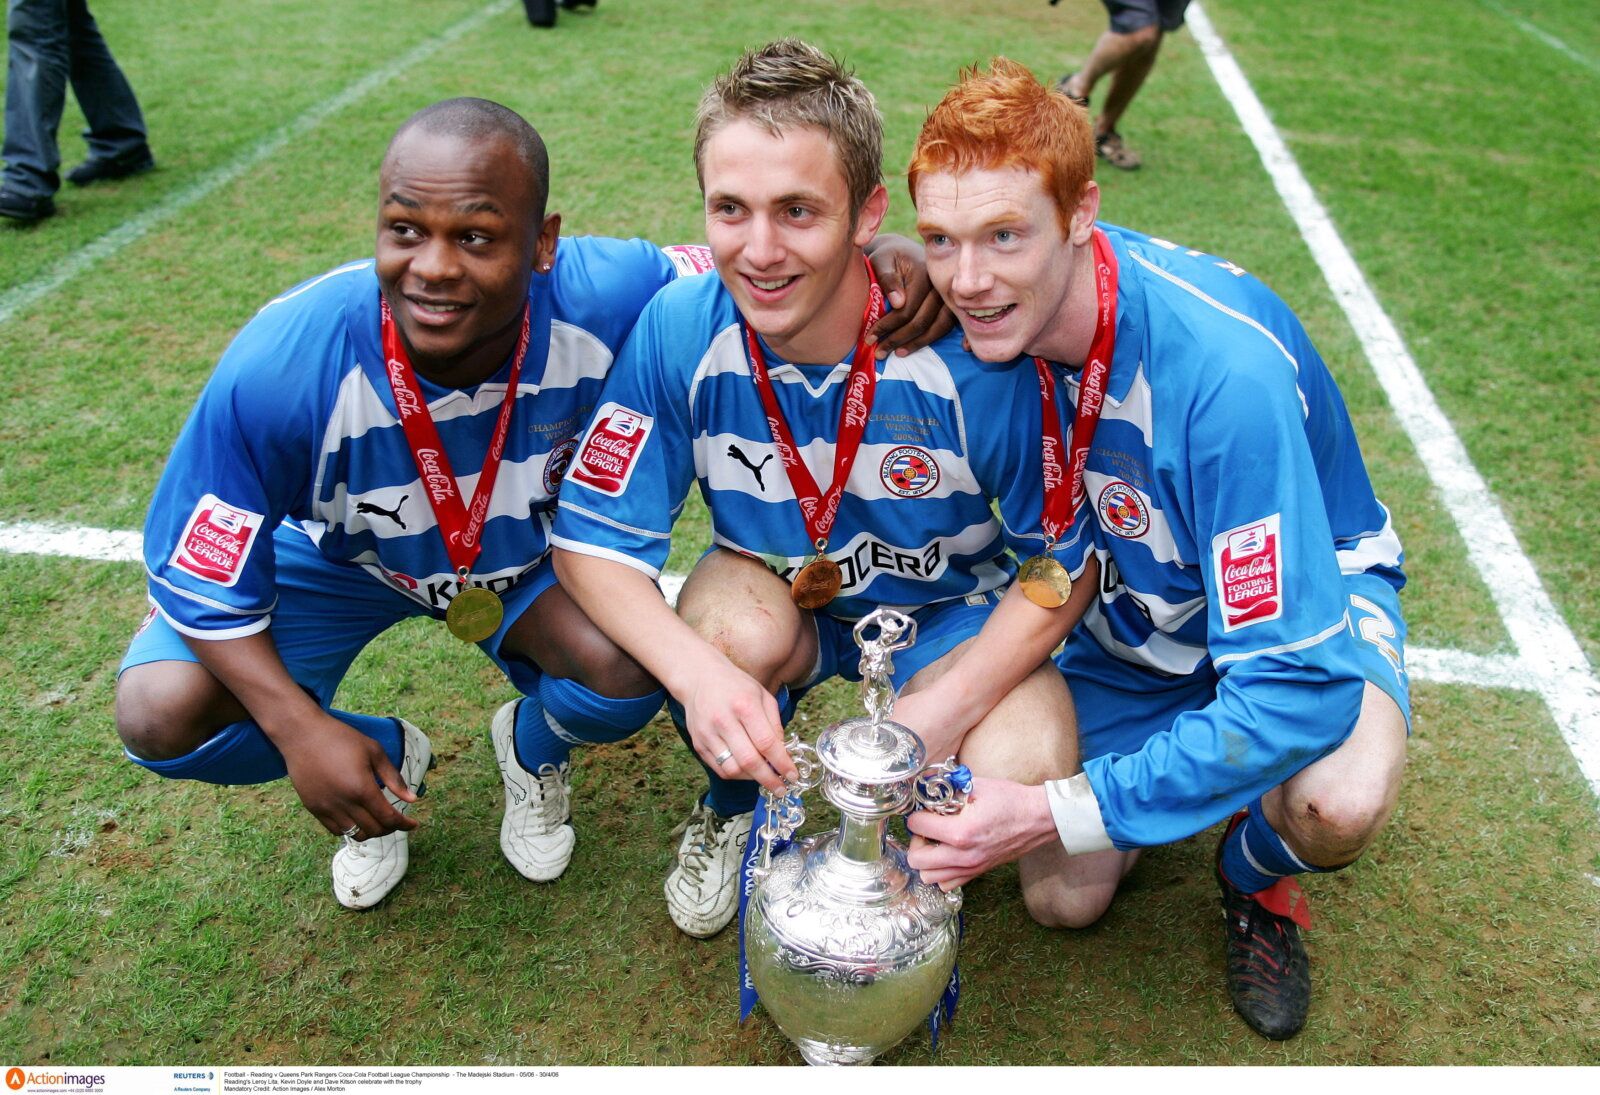 Football - Reading v Queens Park Rangers Coca-Cola Football League Championship  - The Madejski Stadium - 05/06 - 30/4/06 
Reading's Leroy Lita, Kevin Doyle and Dave Kitson celebrate with the trophy  
Mandatory Credit: Action Images / Alex Morton